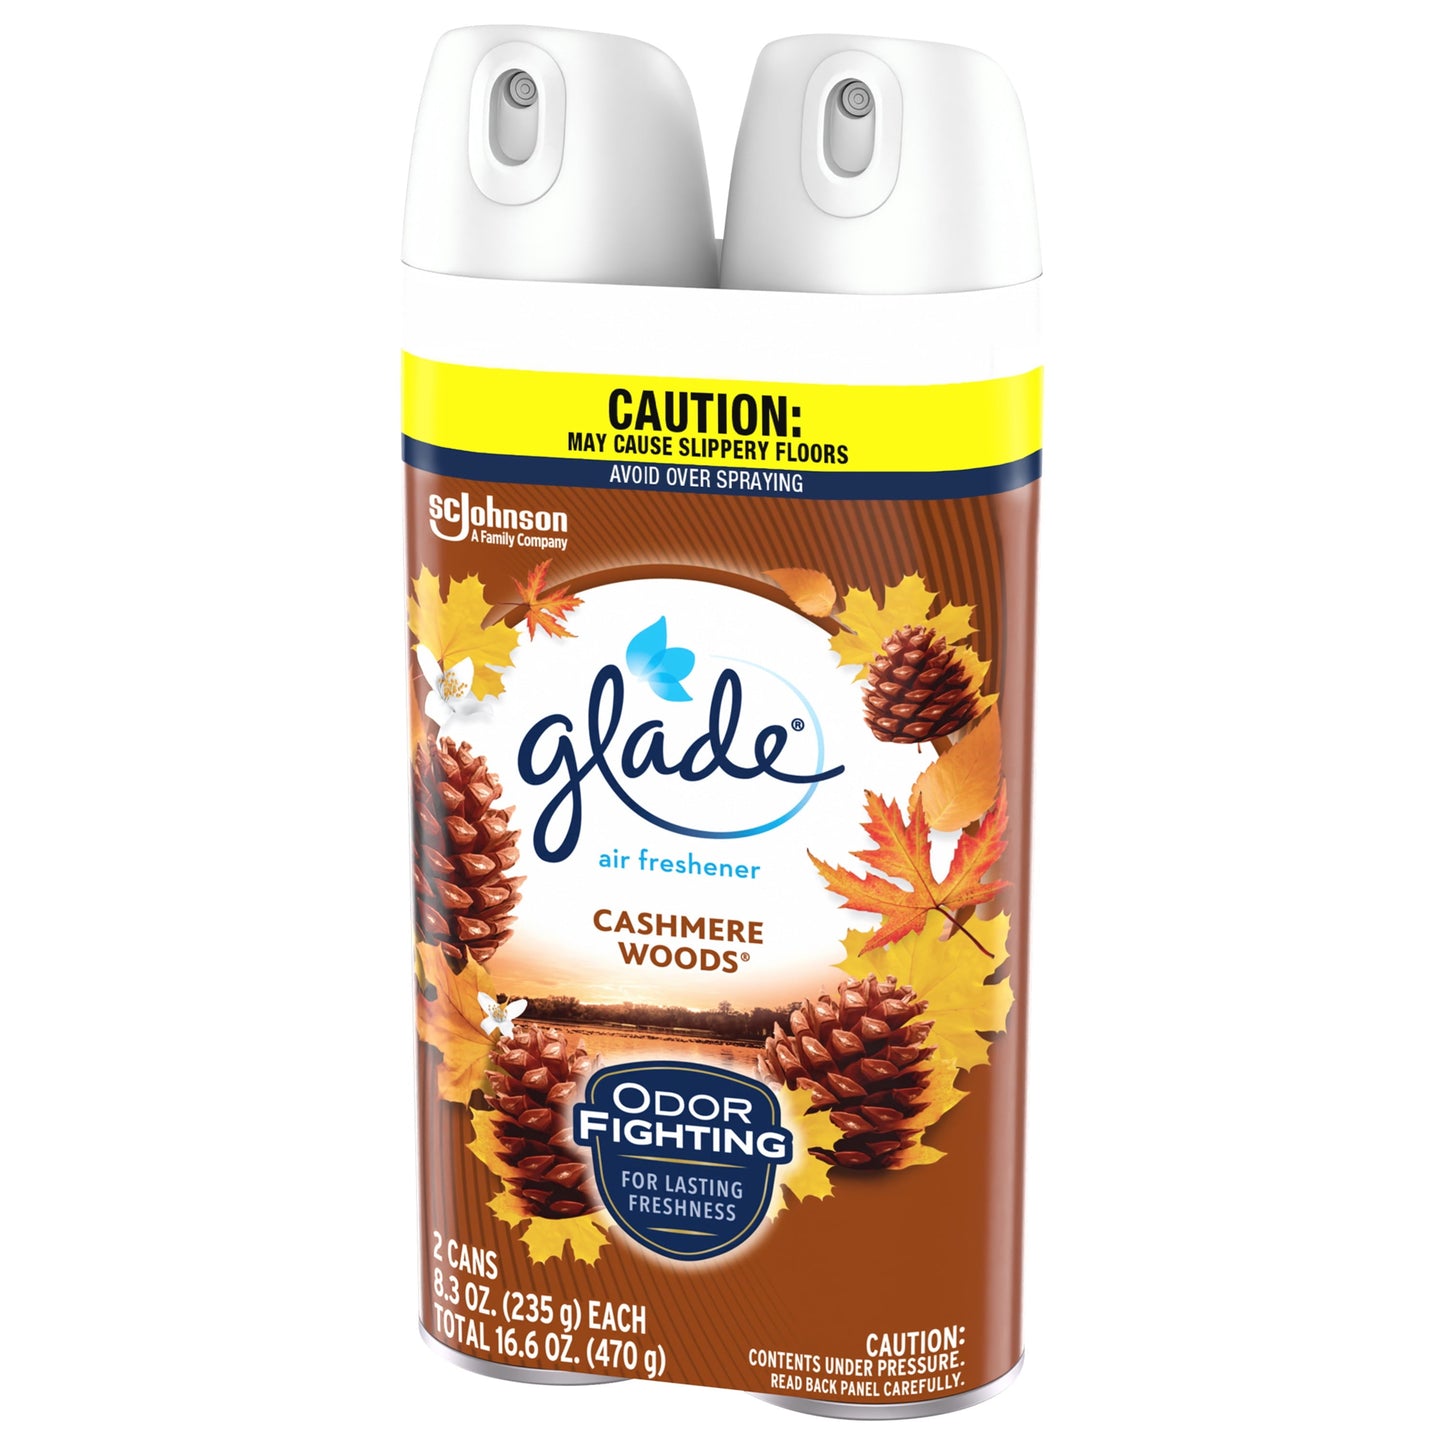 Glade Aerosol Spray, Air Freshener for Home, Cashmere Woods Scent, Fragrance Infused with Essential Oils, Invigorating and Refreshing, with 100% Natural Propellent, 8.3 oz, 2 Pack